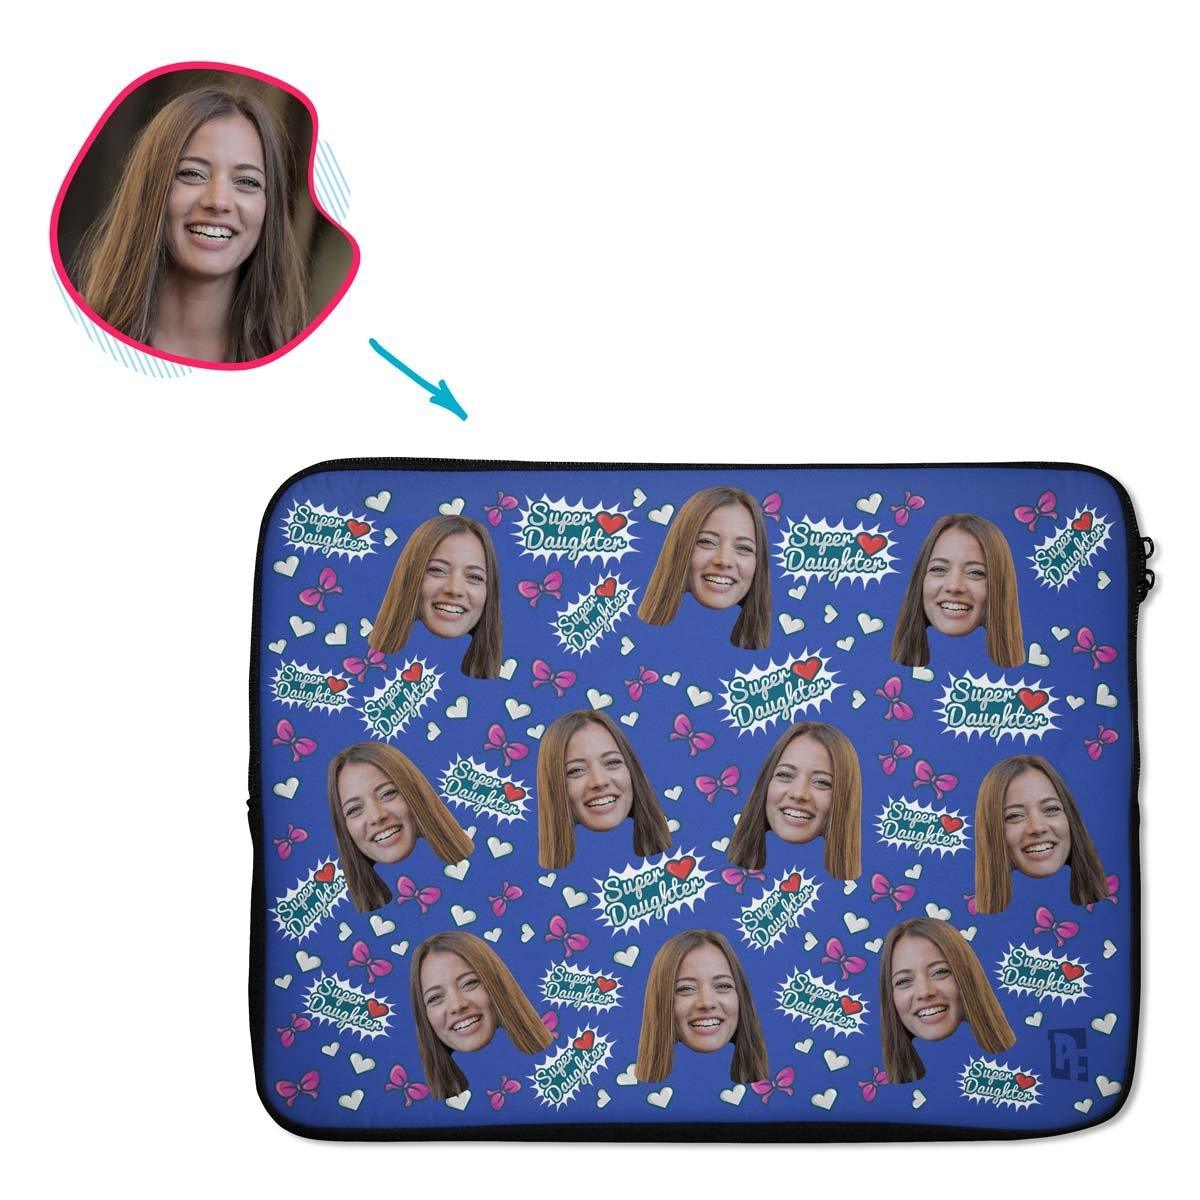 darkblue Super Daughter laptop sleeve personalized with photo of face printed on them